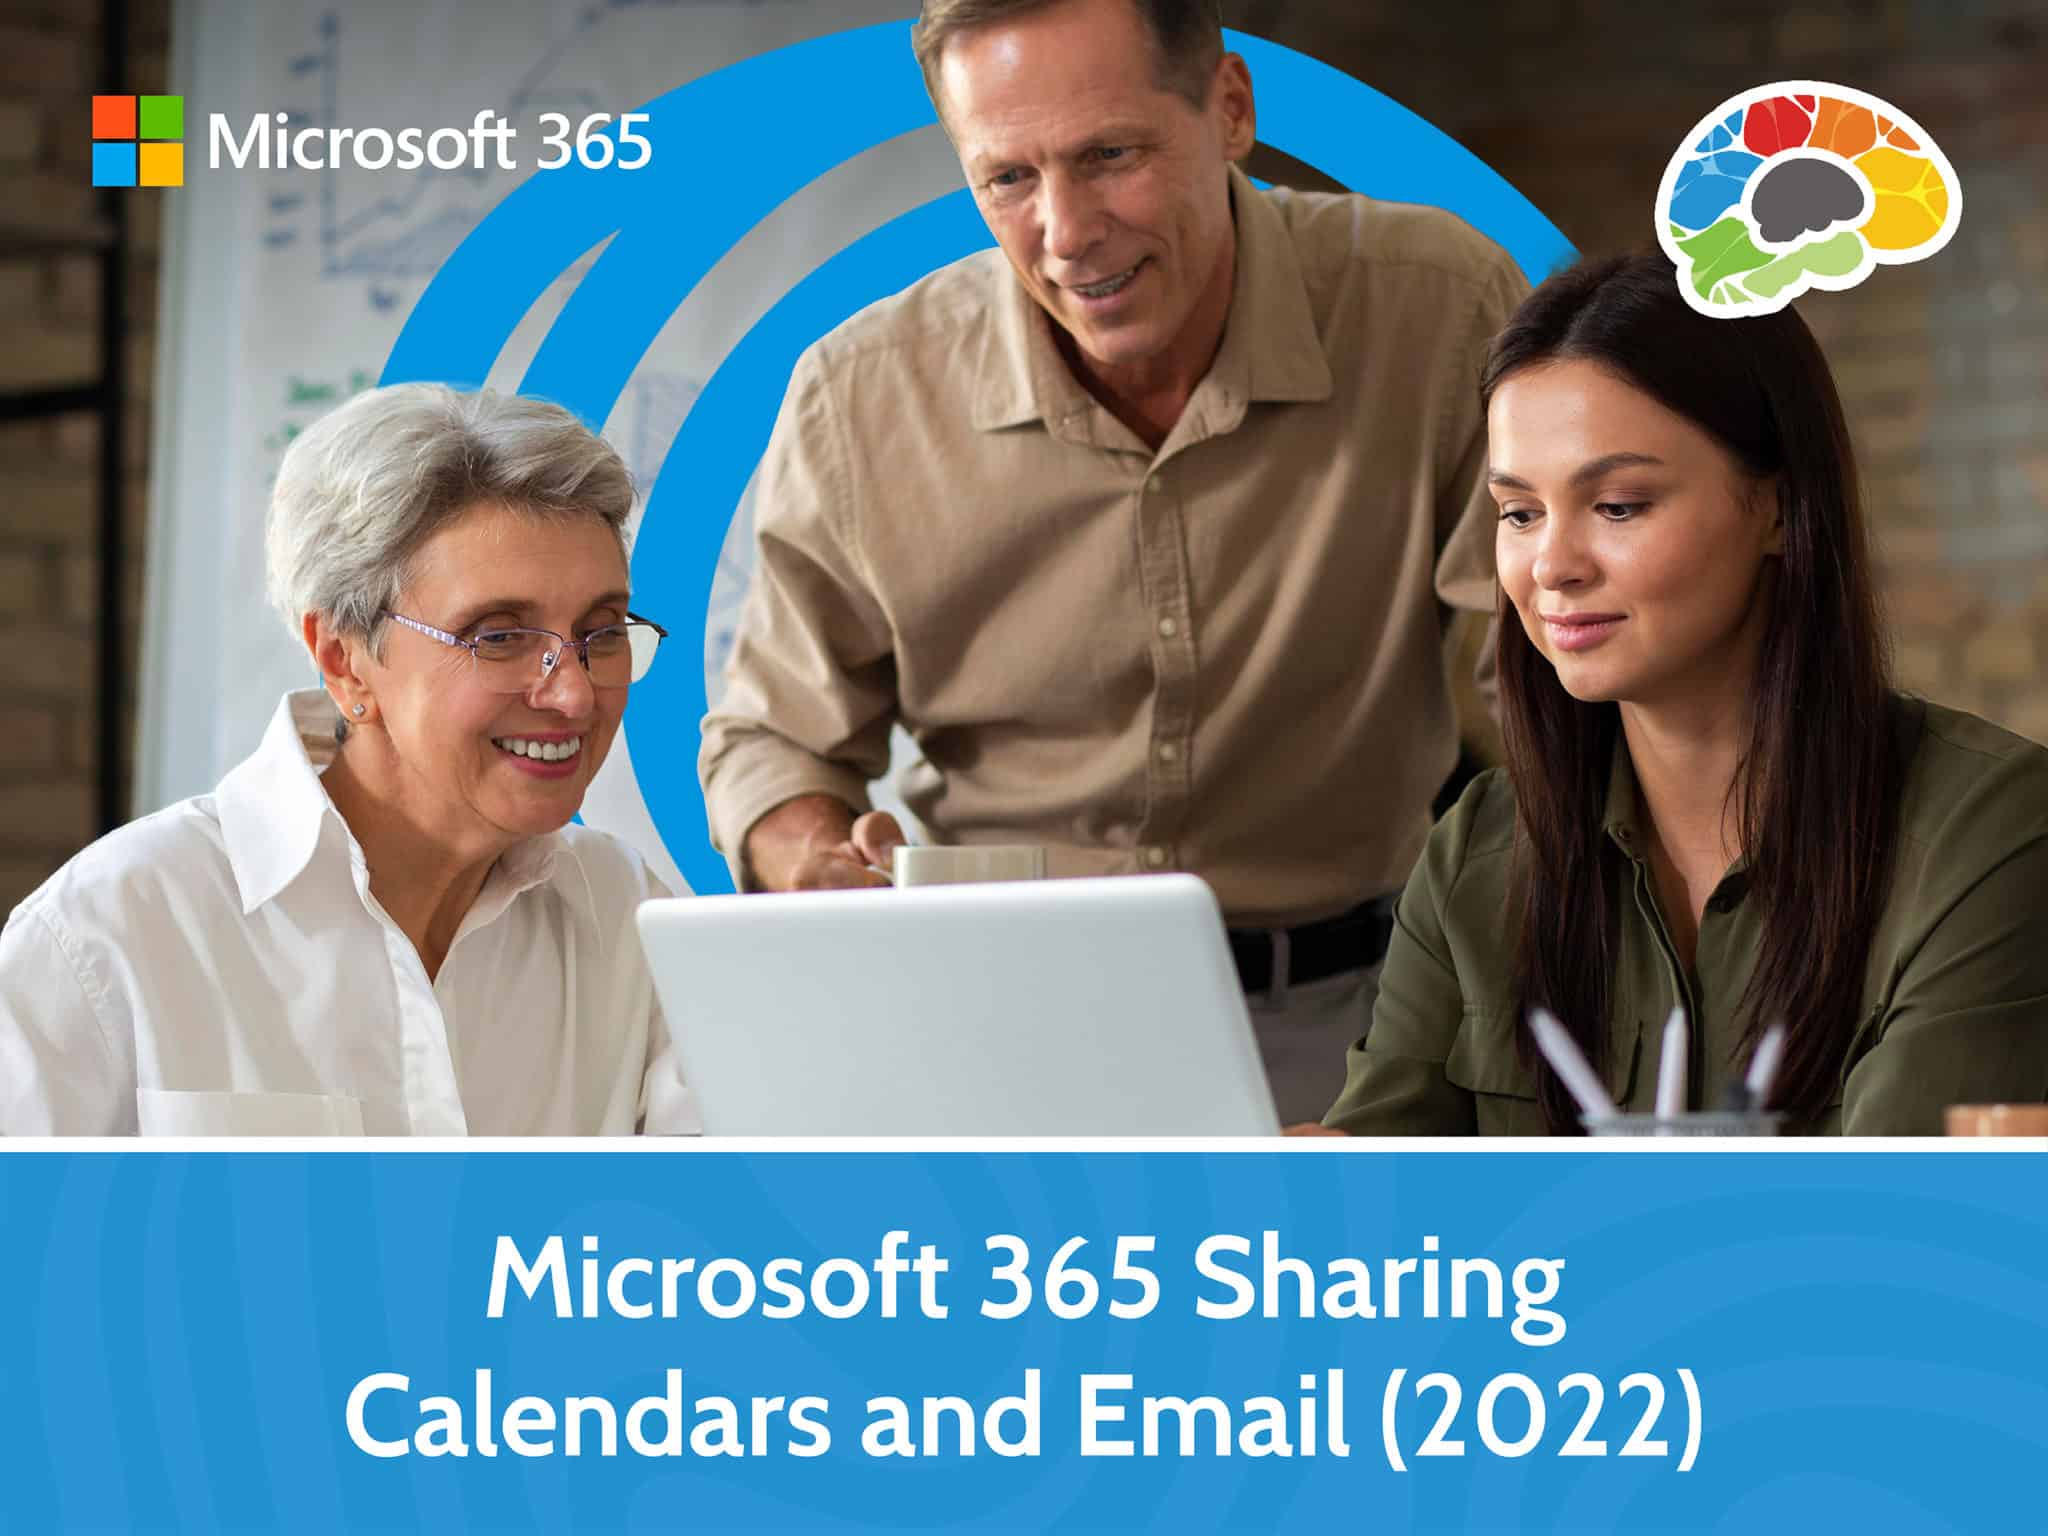 Microsoft 365 Sharing Calendars and Email 2022 scaled